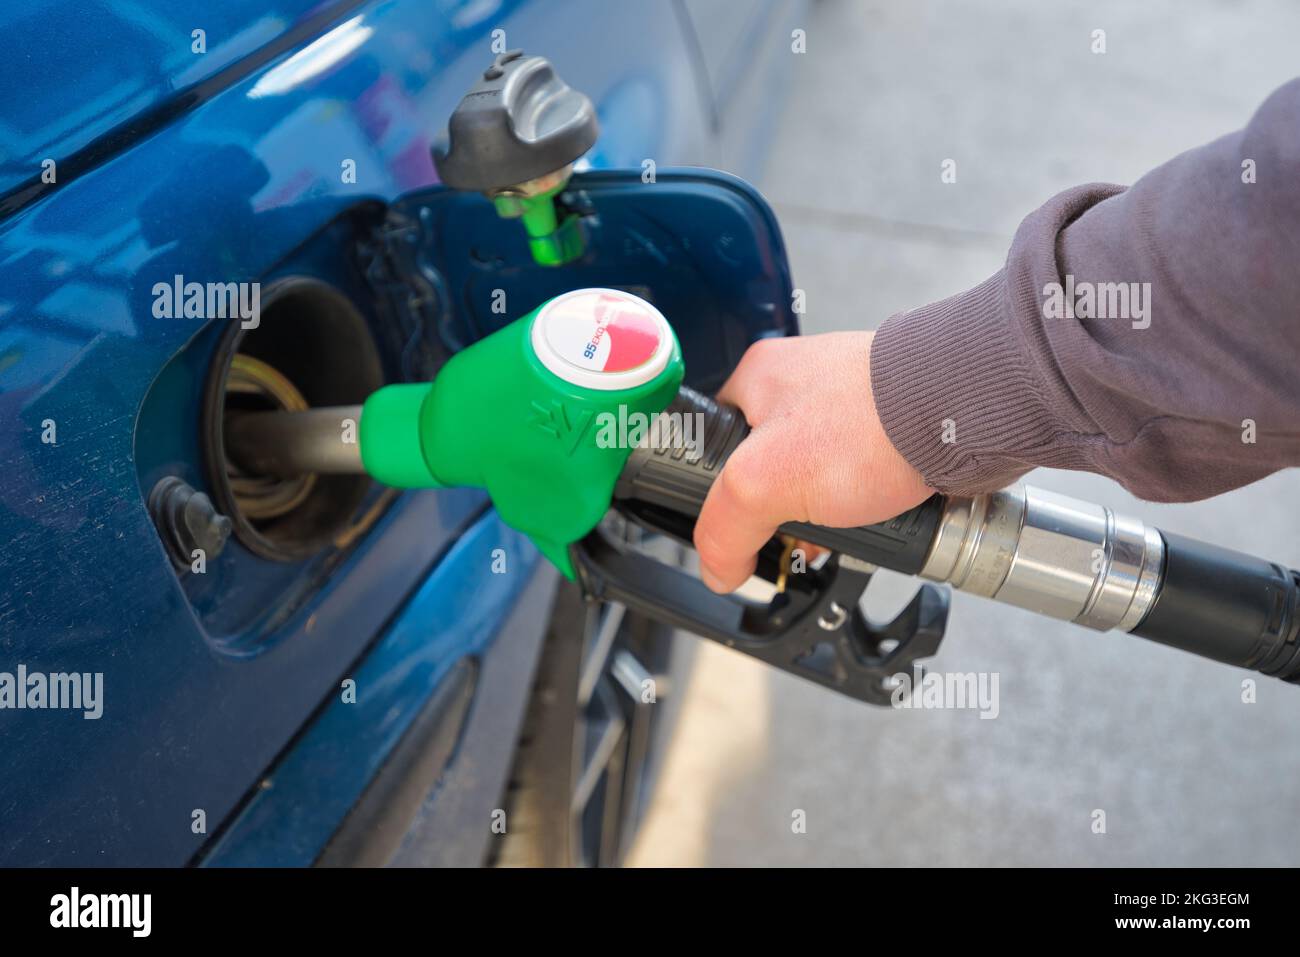 filling up a car's petrol tank at a gas station Stock Photo